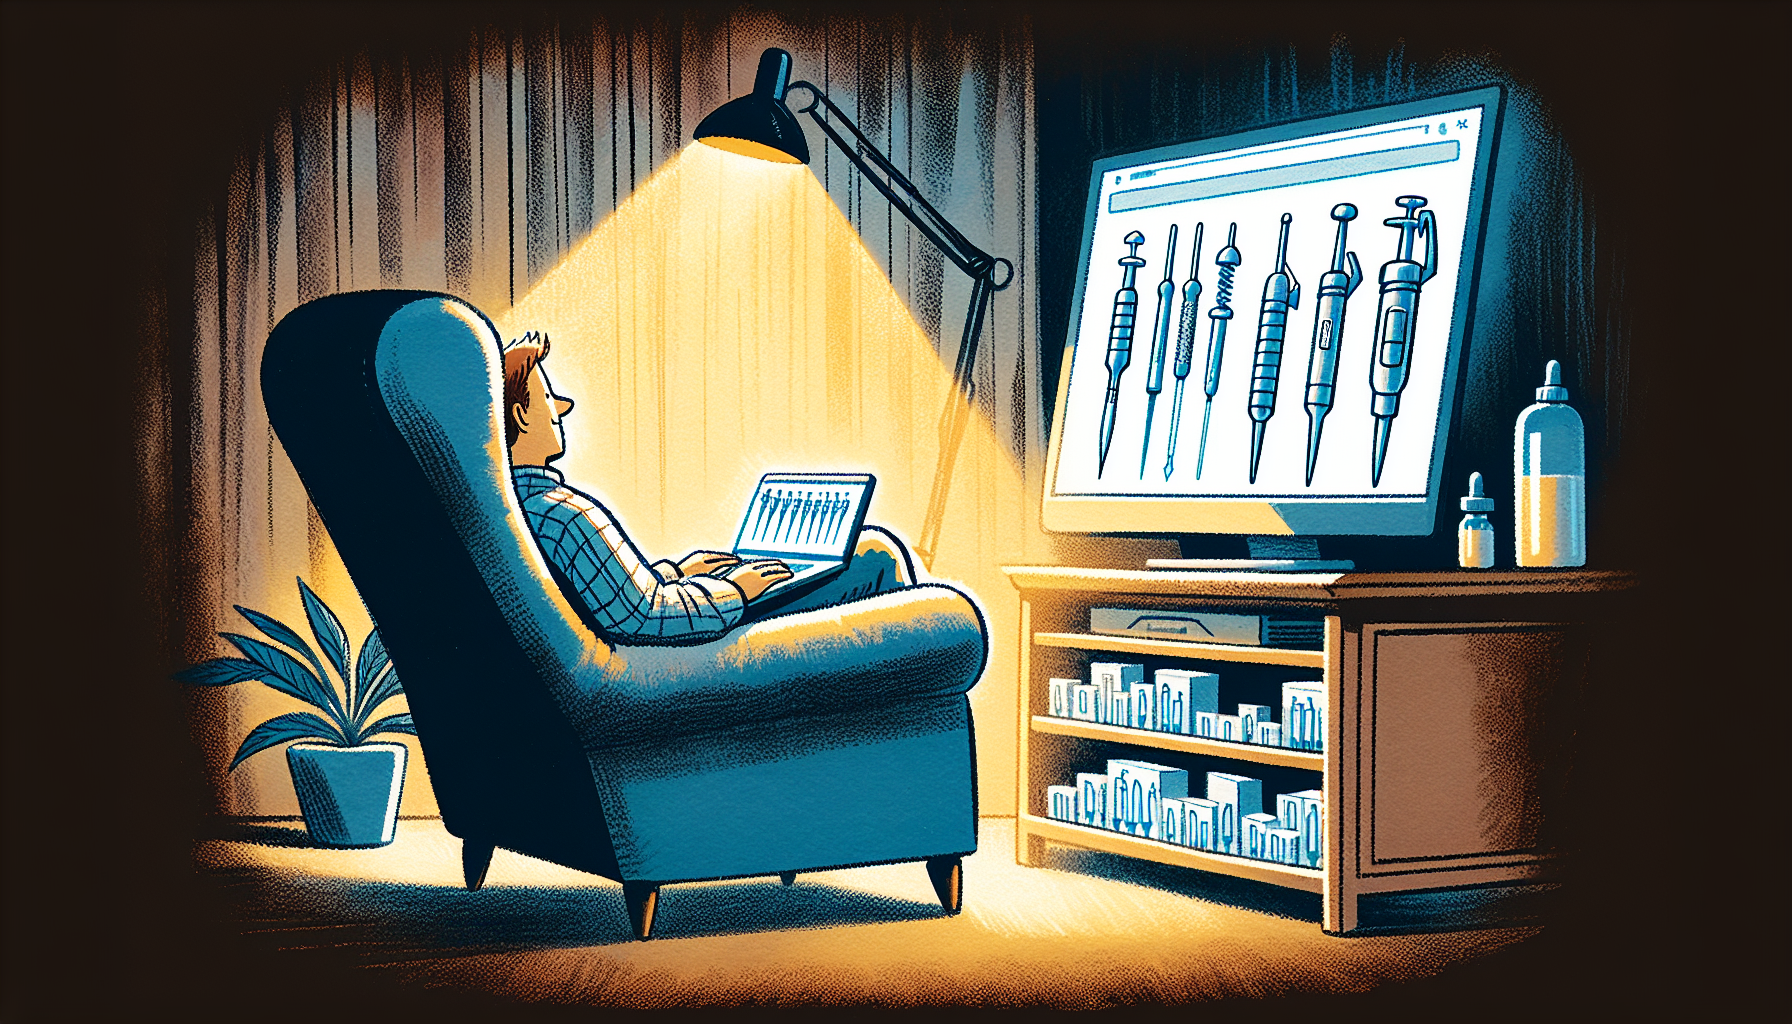 Cartoon of a person shopping online for pipettes